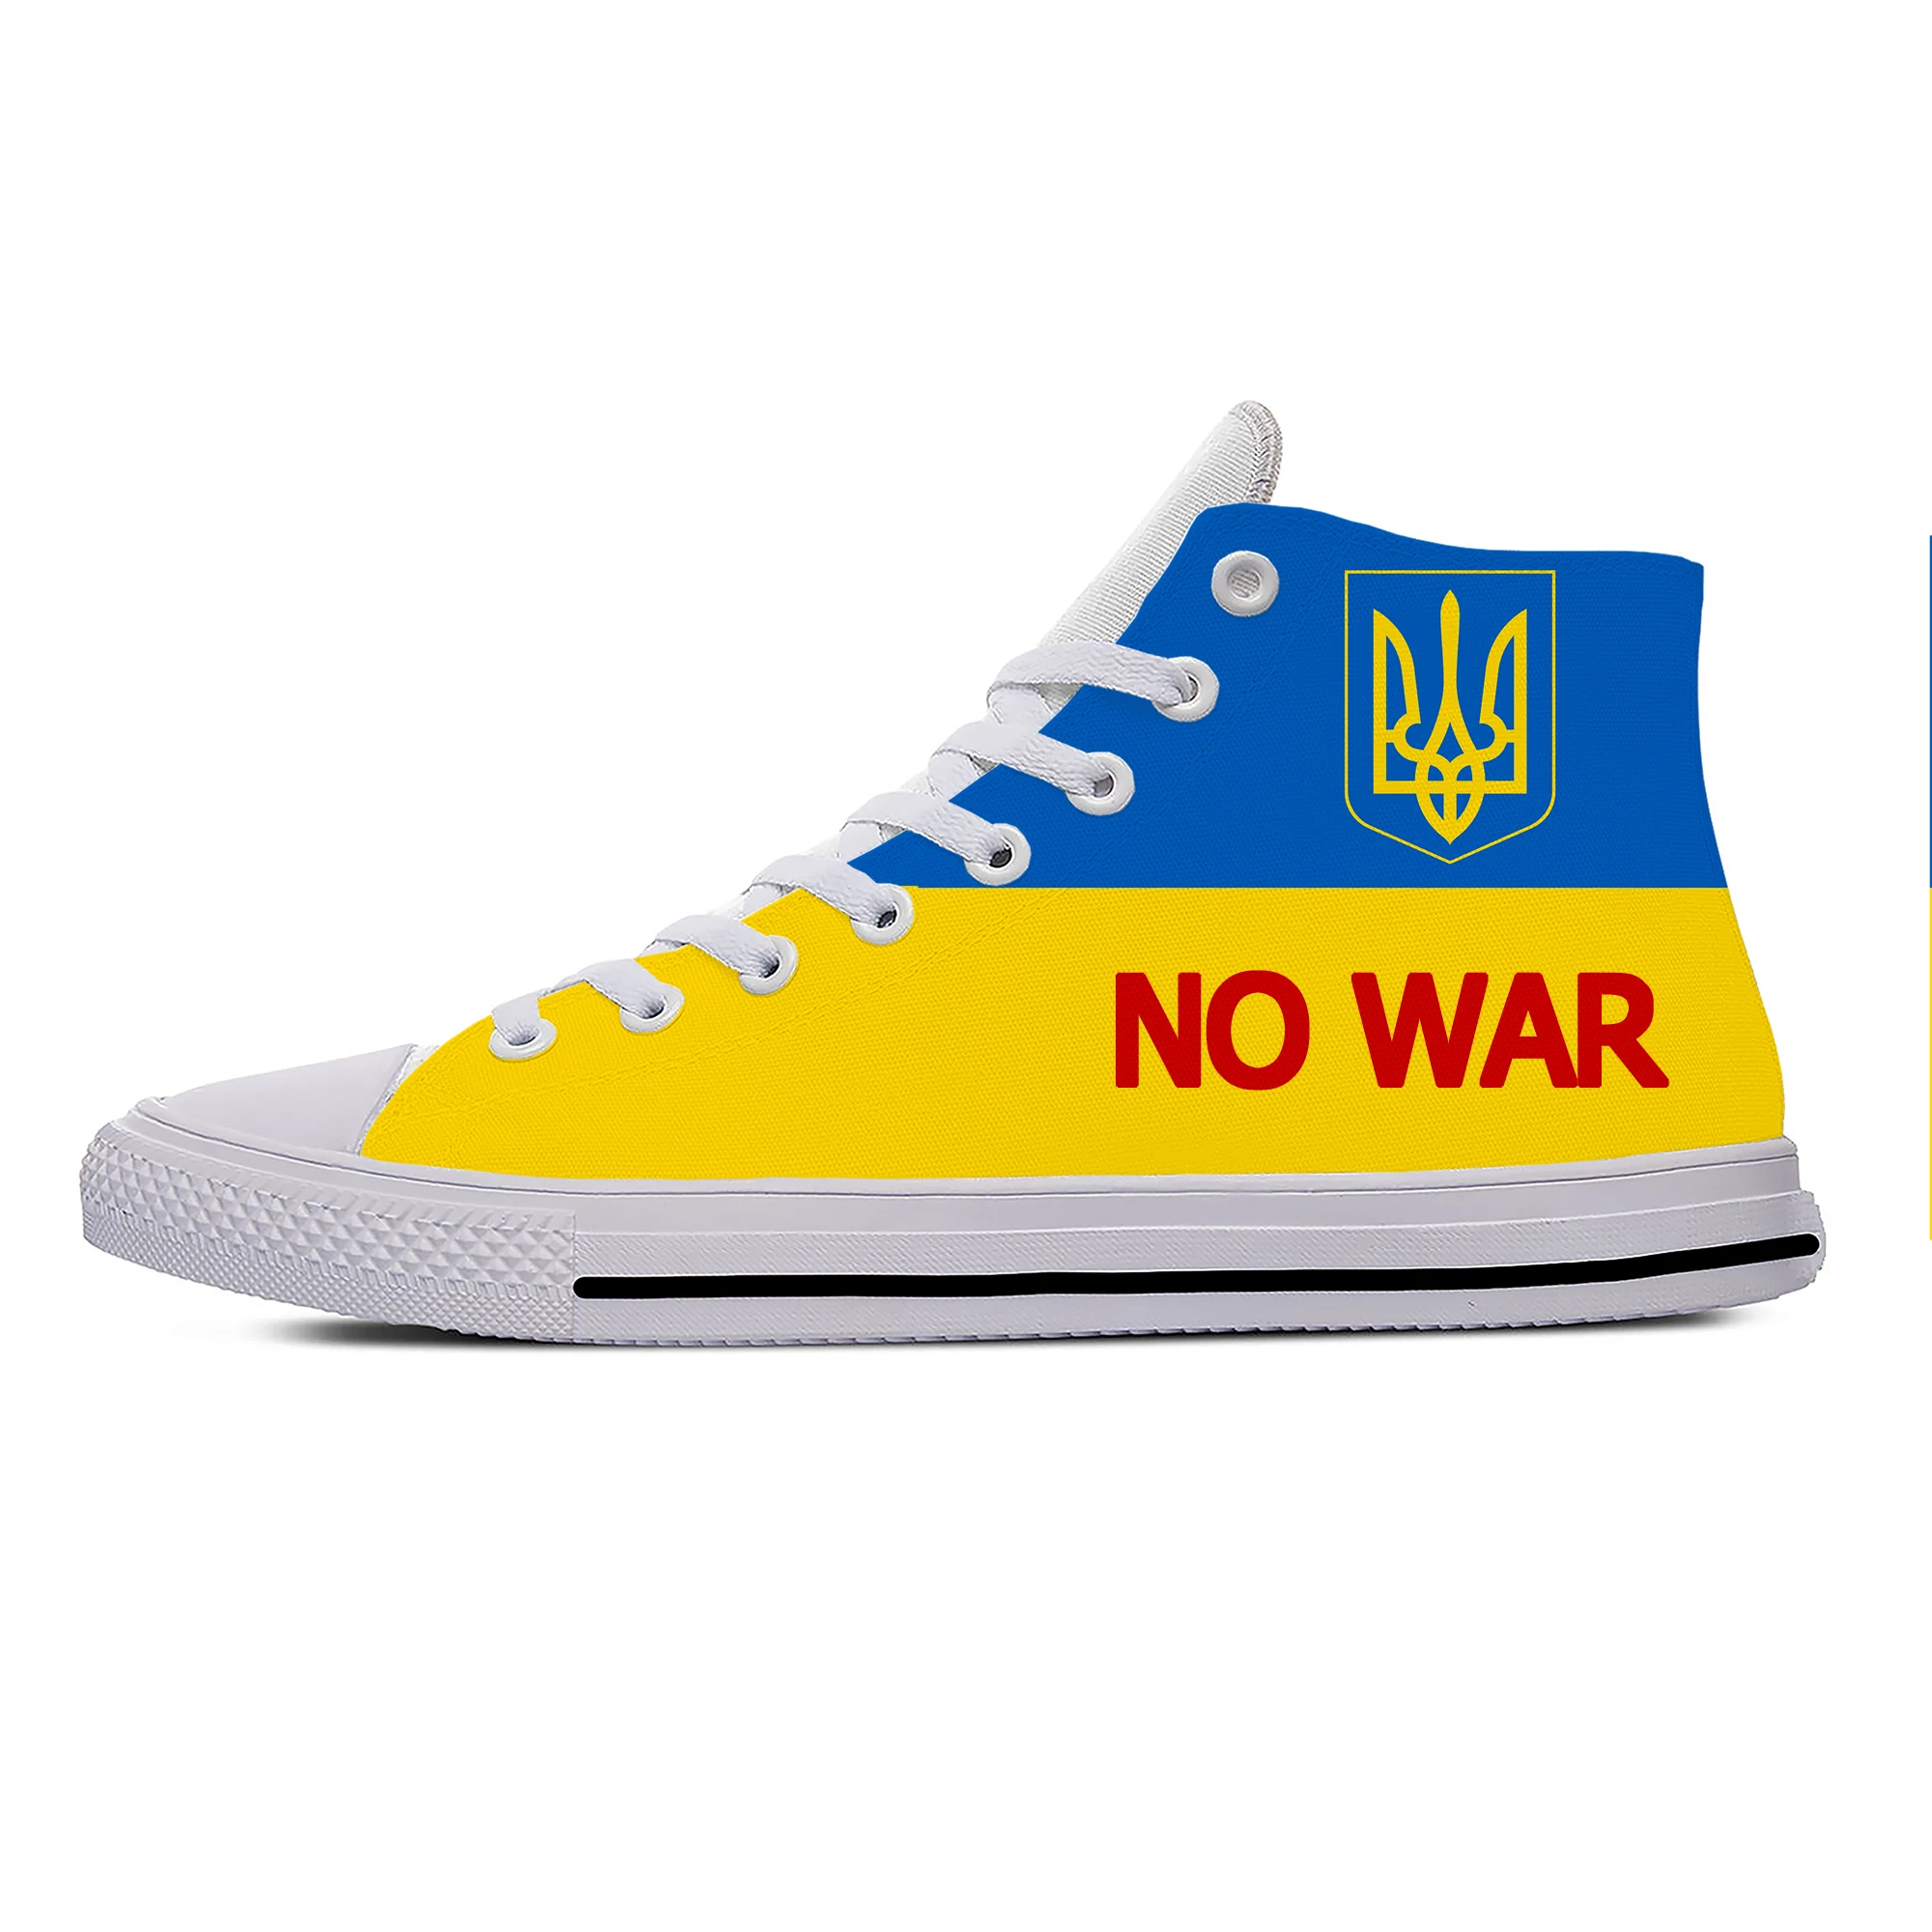 

Ukraine Flag High Top Sneakers Need Peace Mens Womens Teenager Casual Shoes Running Shoes Breathable Lightweight shoe